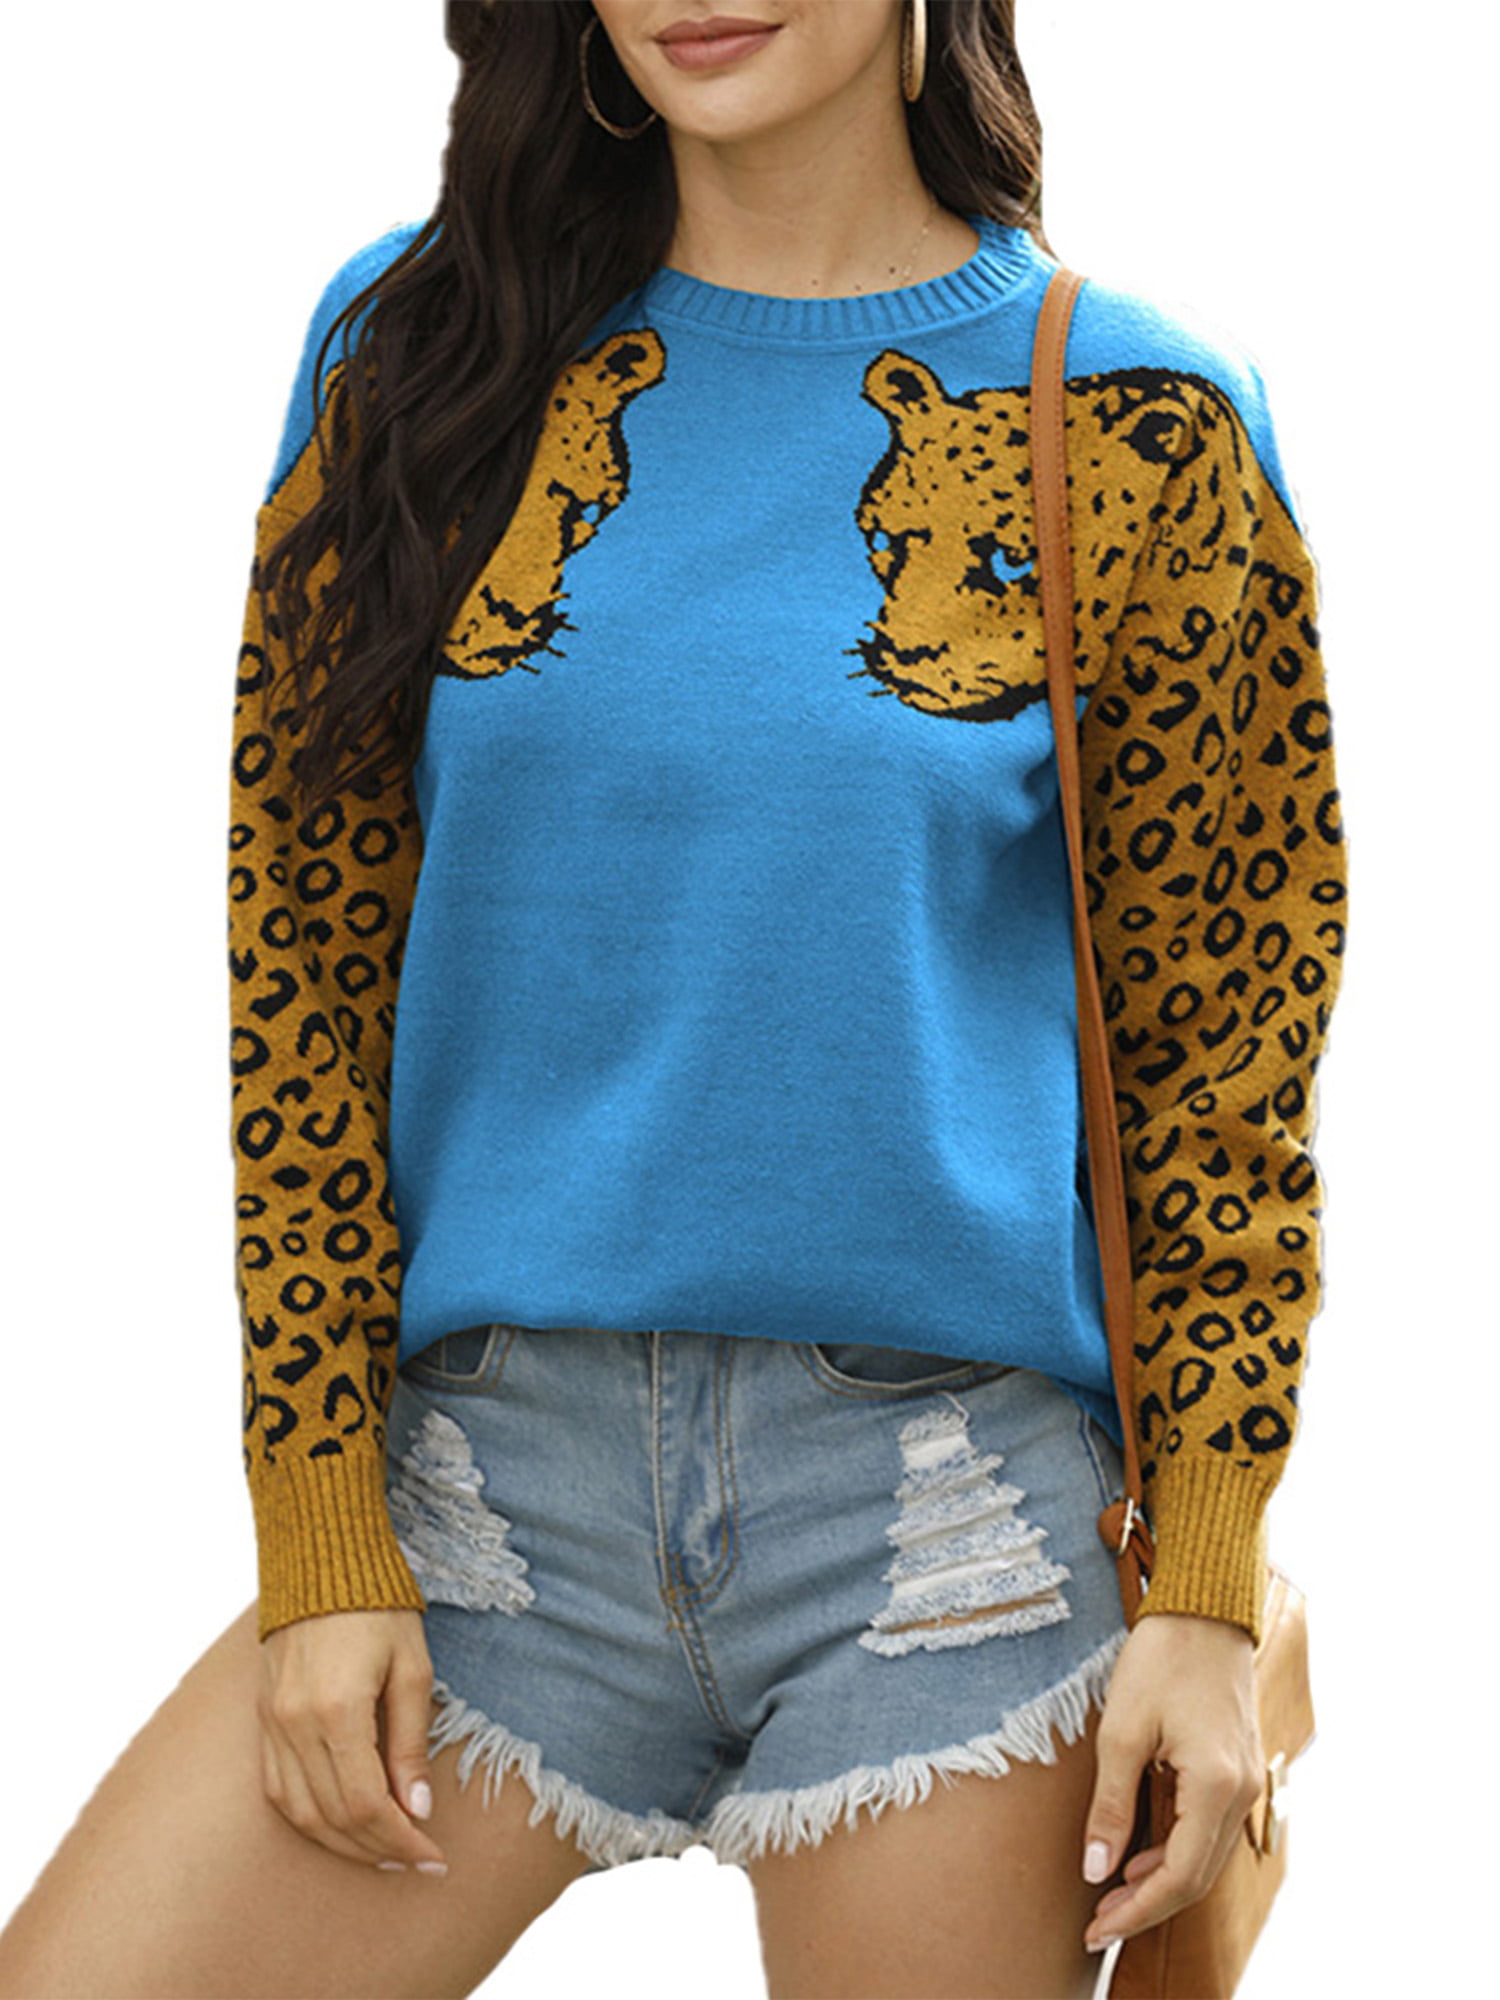 Casual Loose Fit Pullover Top for Women-Leopard Patchwork Print Blouse Winter Lightweight Comfy Ladies Sweatshirts 